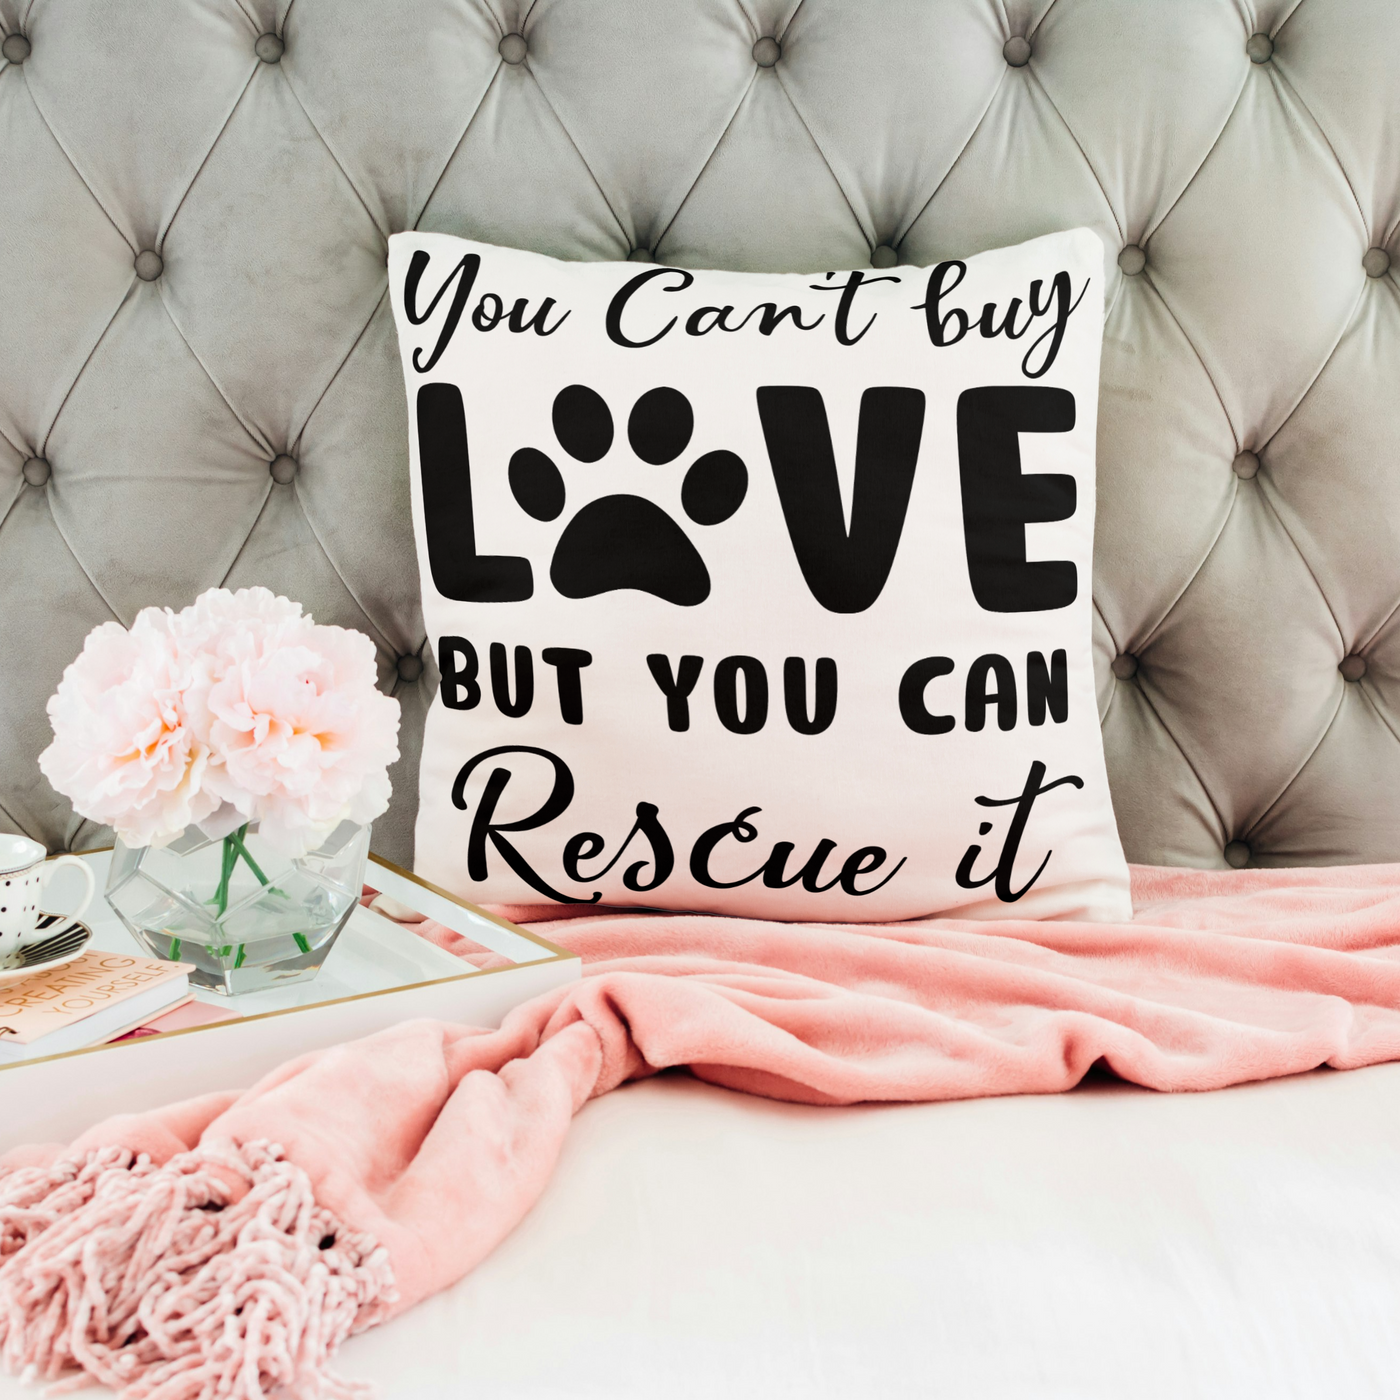 You Can't Buy Love But You Can Rescue It Square Pillow